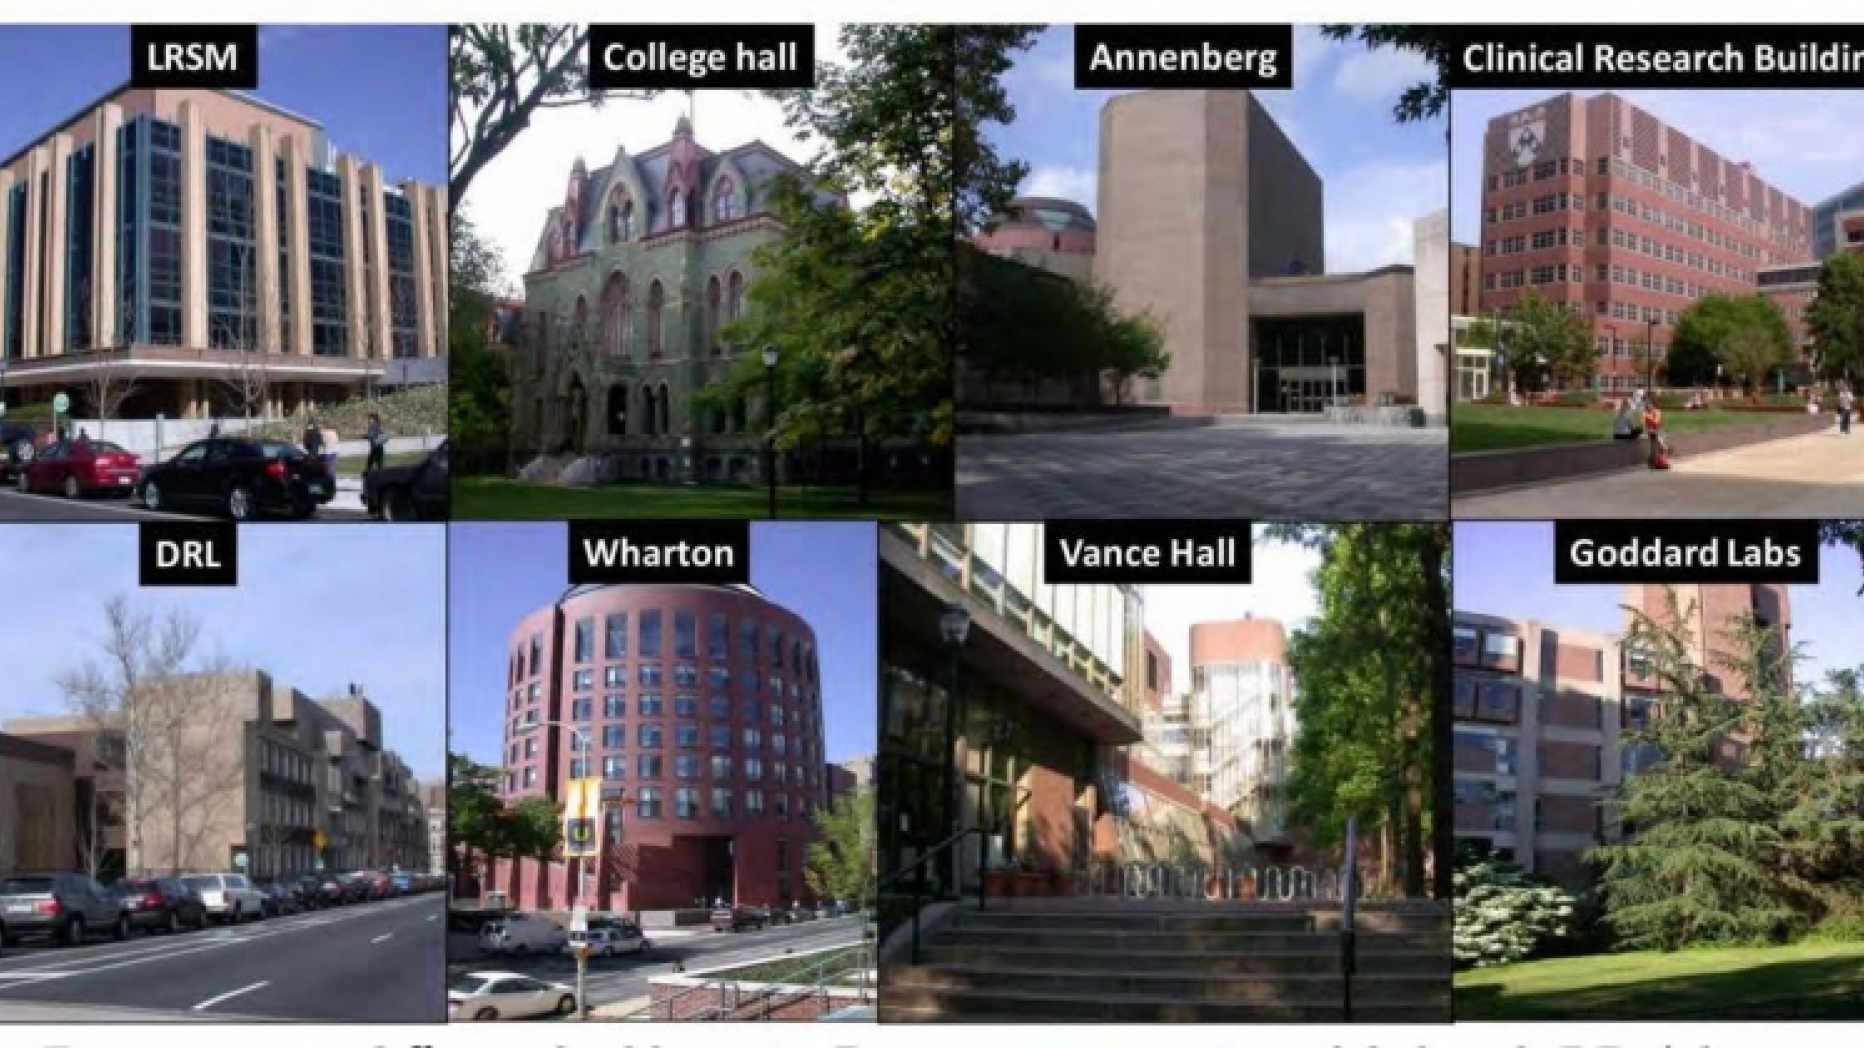 Photos of different buildings on Penn campus.